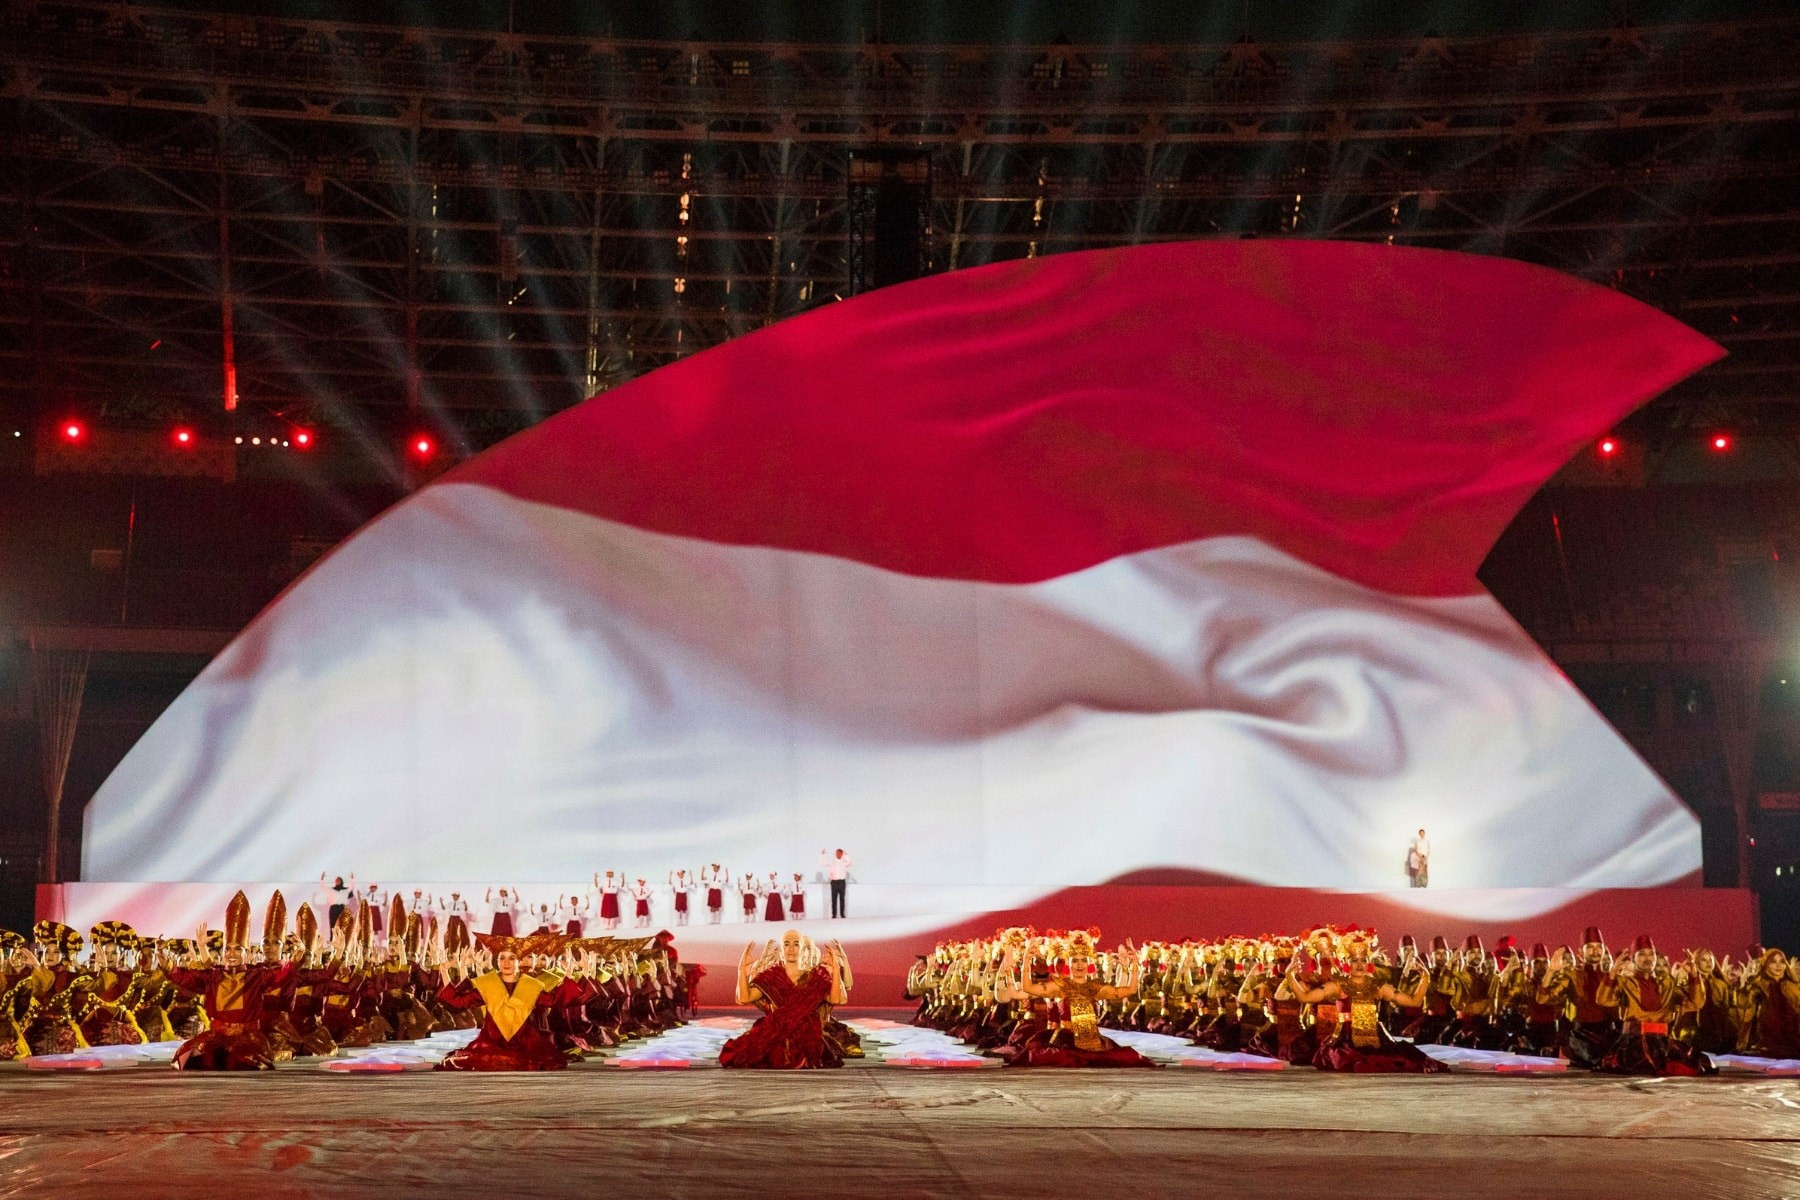 Jakarta hosted the Opening Ceremony at the Gelora Bung Karno Main Stadium ©Balich